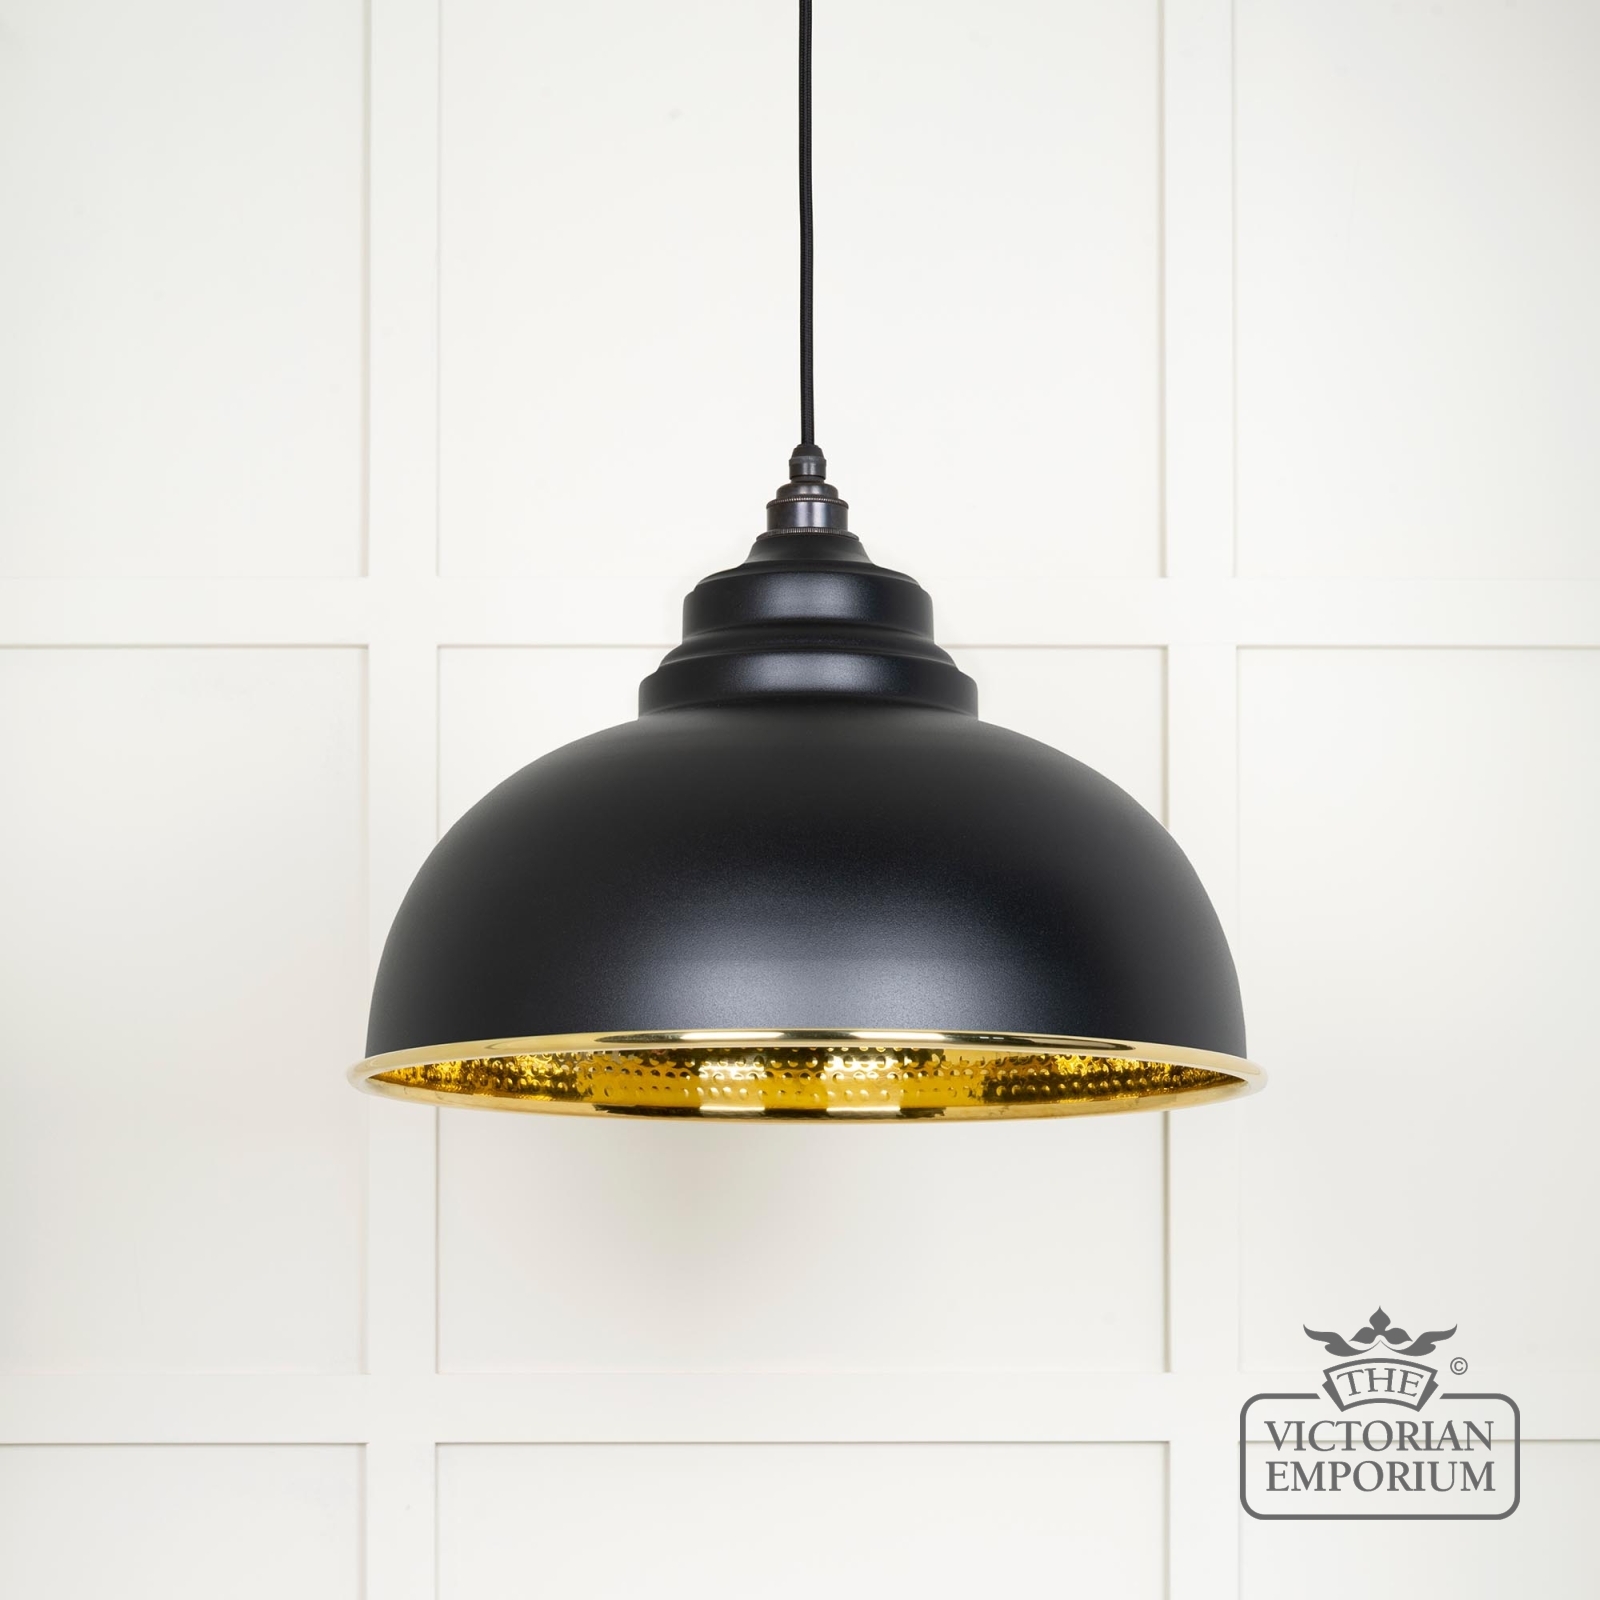 Harlow pendant light in hammered brass with painted Black exterior